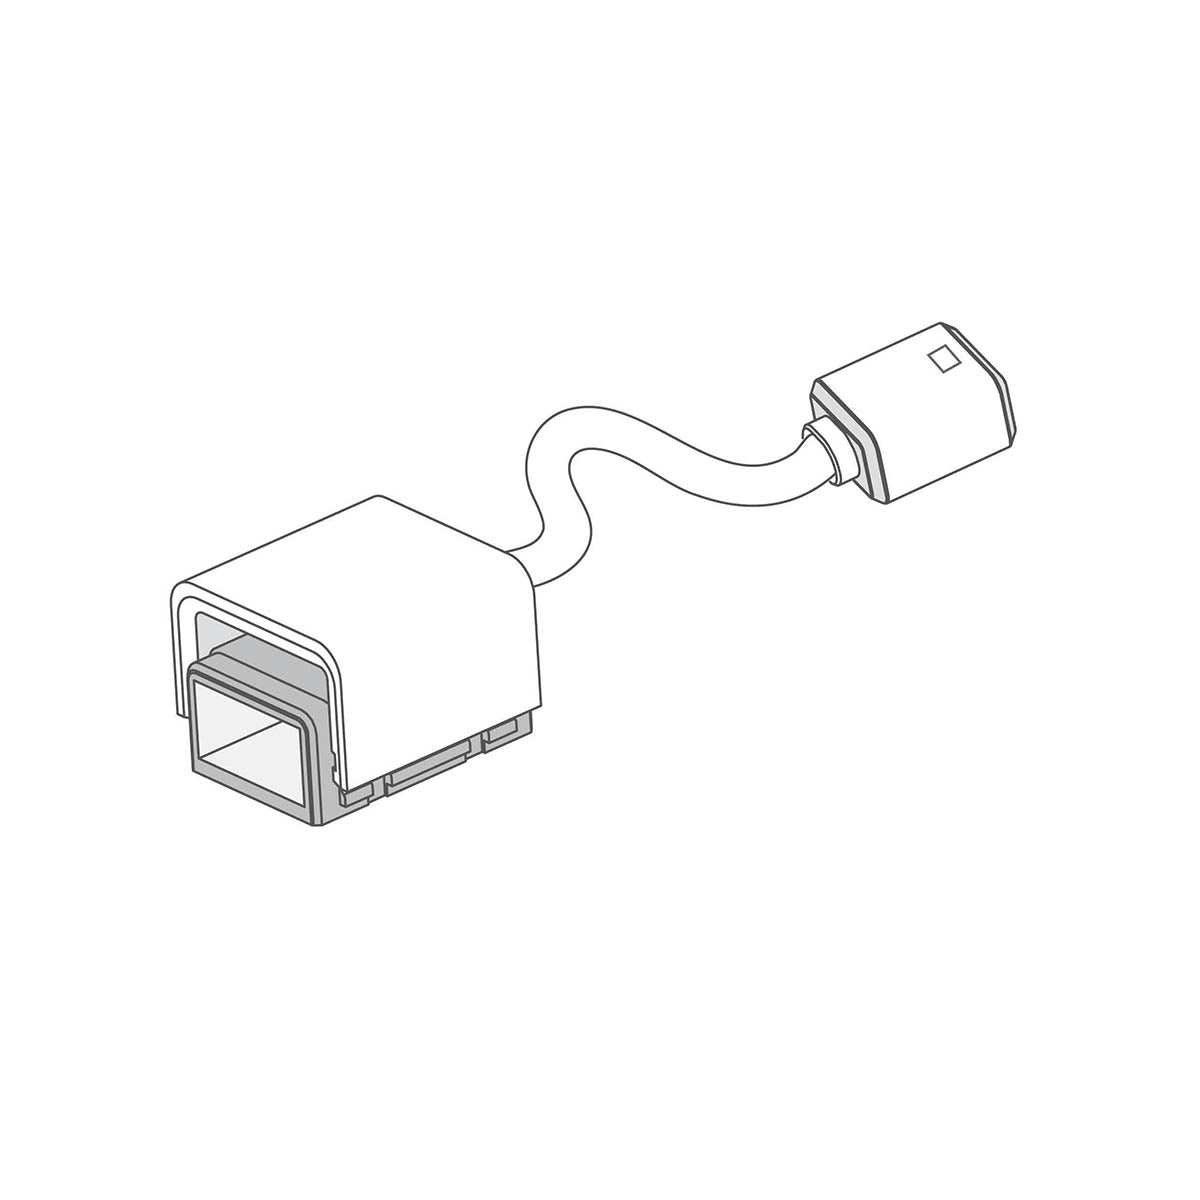 Power Supply Link Connector For Hydrolume Series